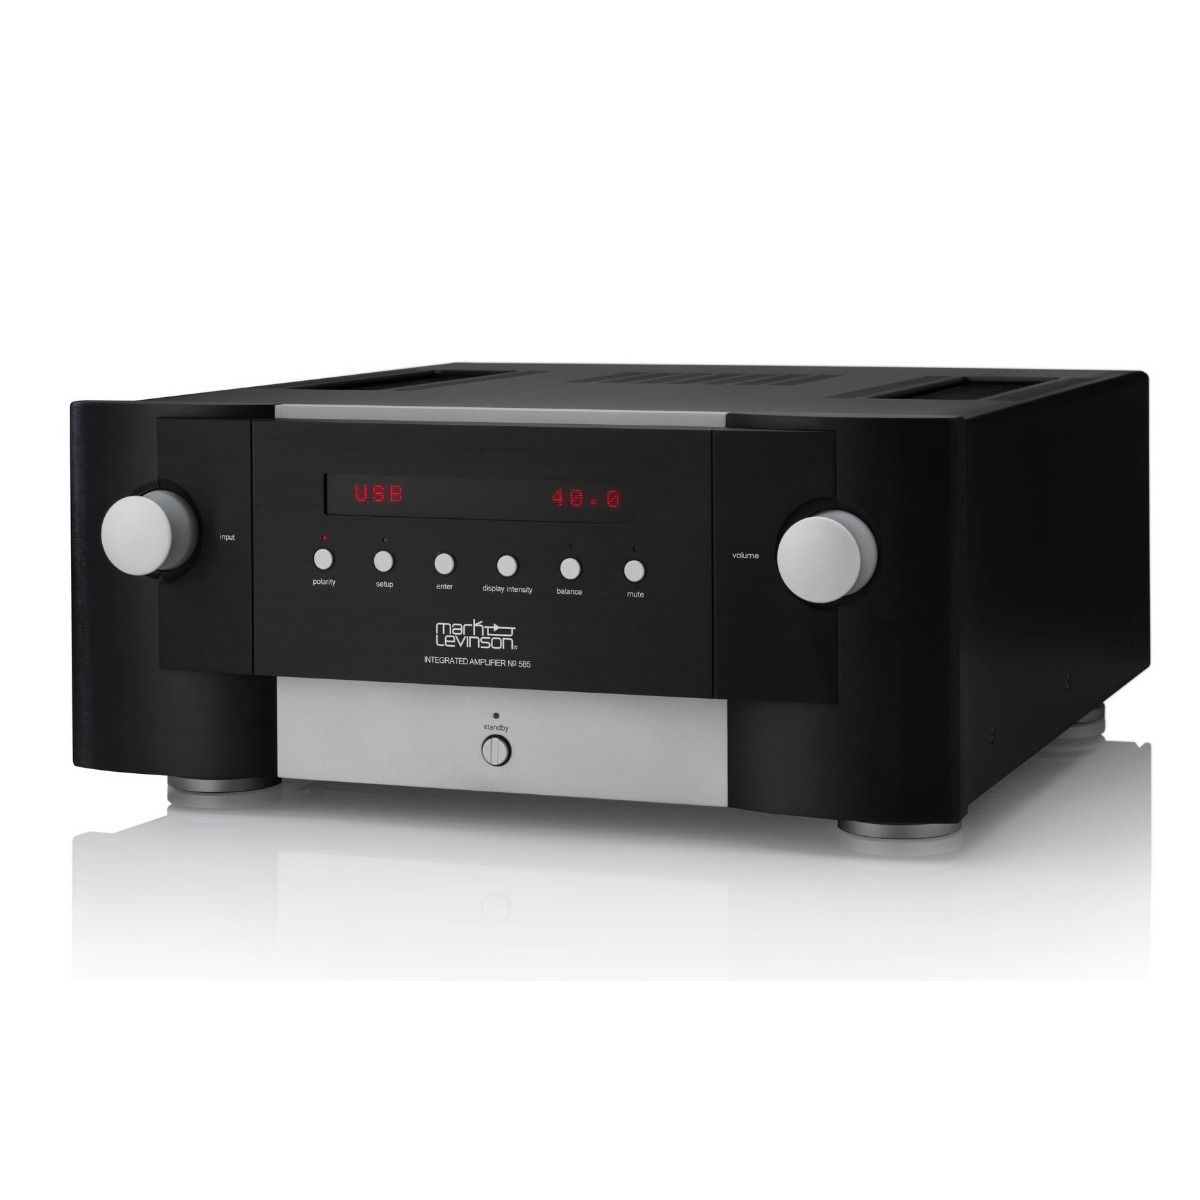 The Nº 585.5 incorporates the same discrete class A Pure Phono stage found in the award winning Nº 526 preamplifier. With unsurpassed analog design, advanced digital audio capability, extensive control and a robust 200 watts per channel, the Nº 585.5 delivers exceptional system performance.